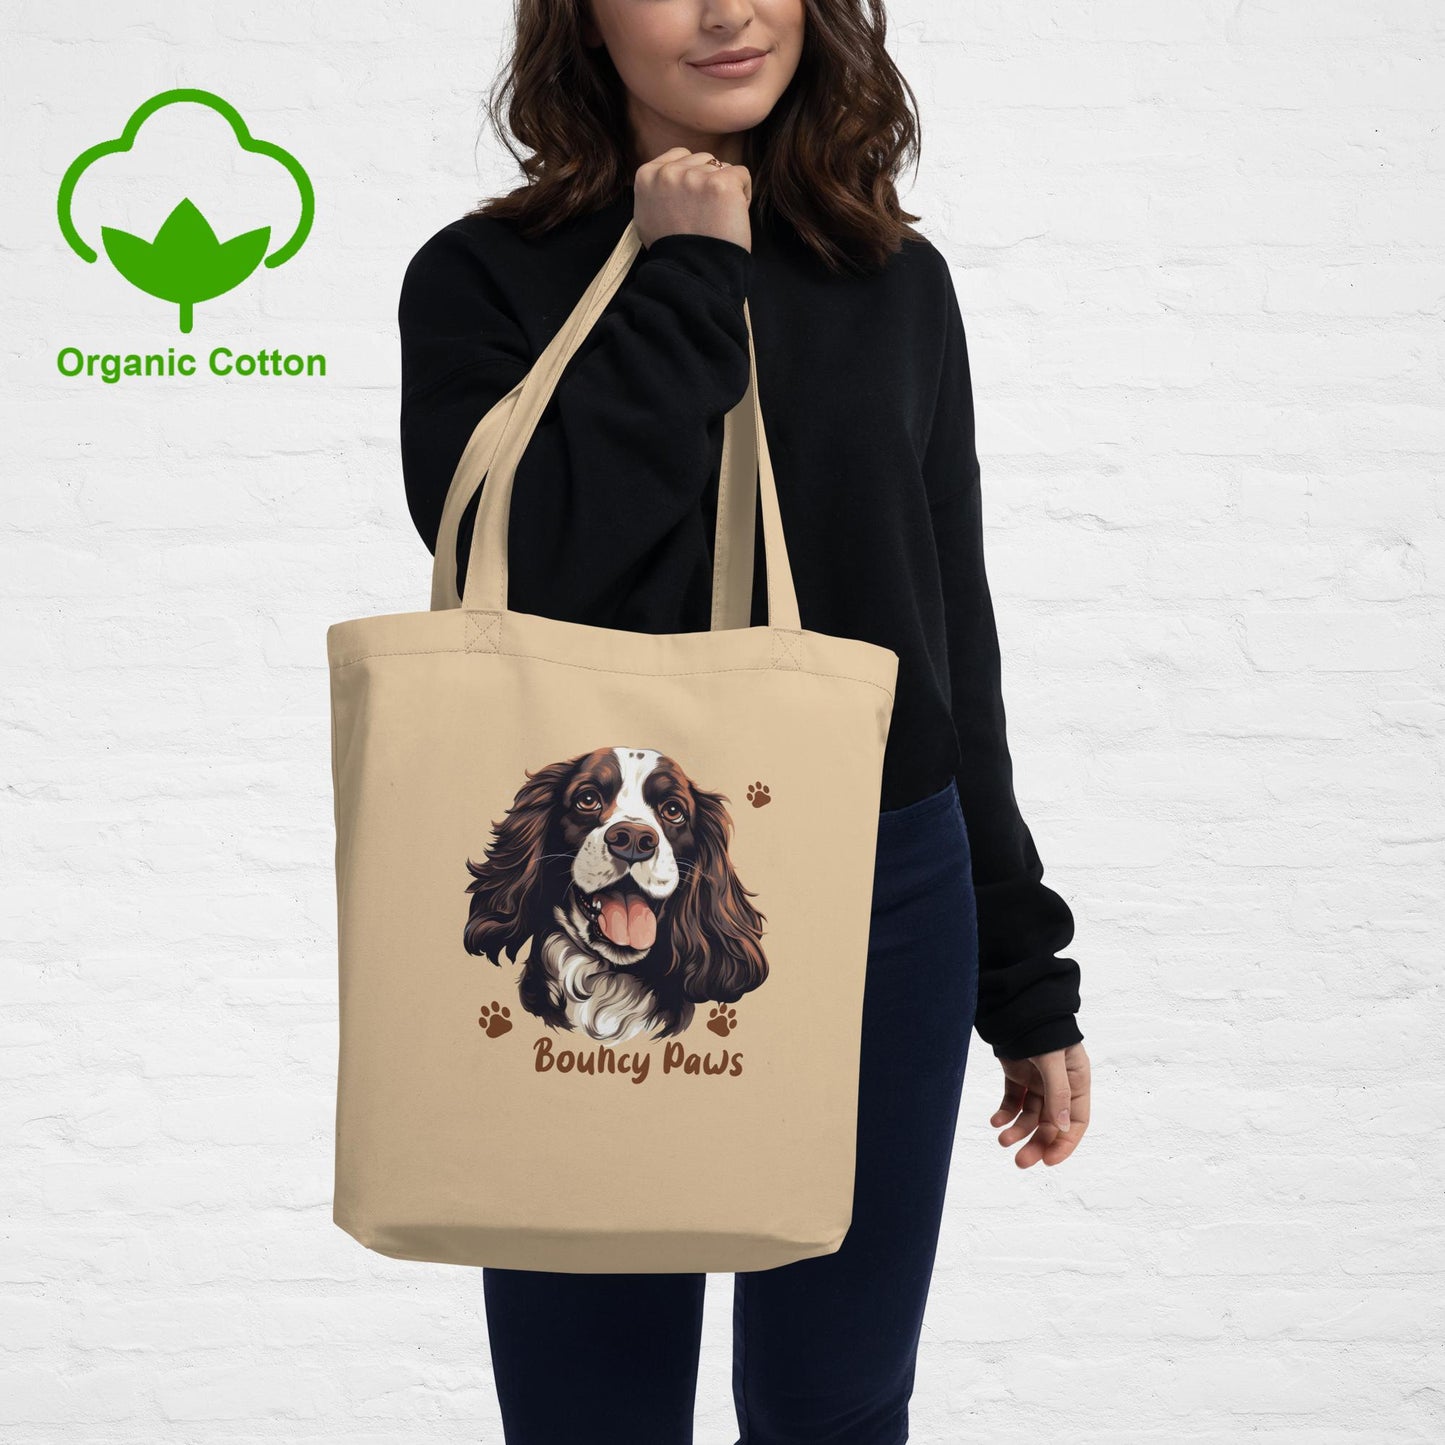 Bouncy Paws Eco Tote Bag in Oyster, held by mode